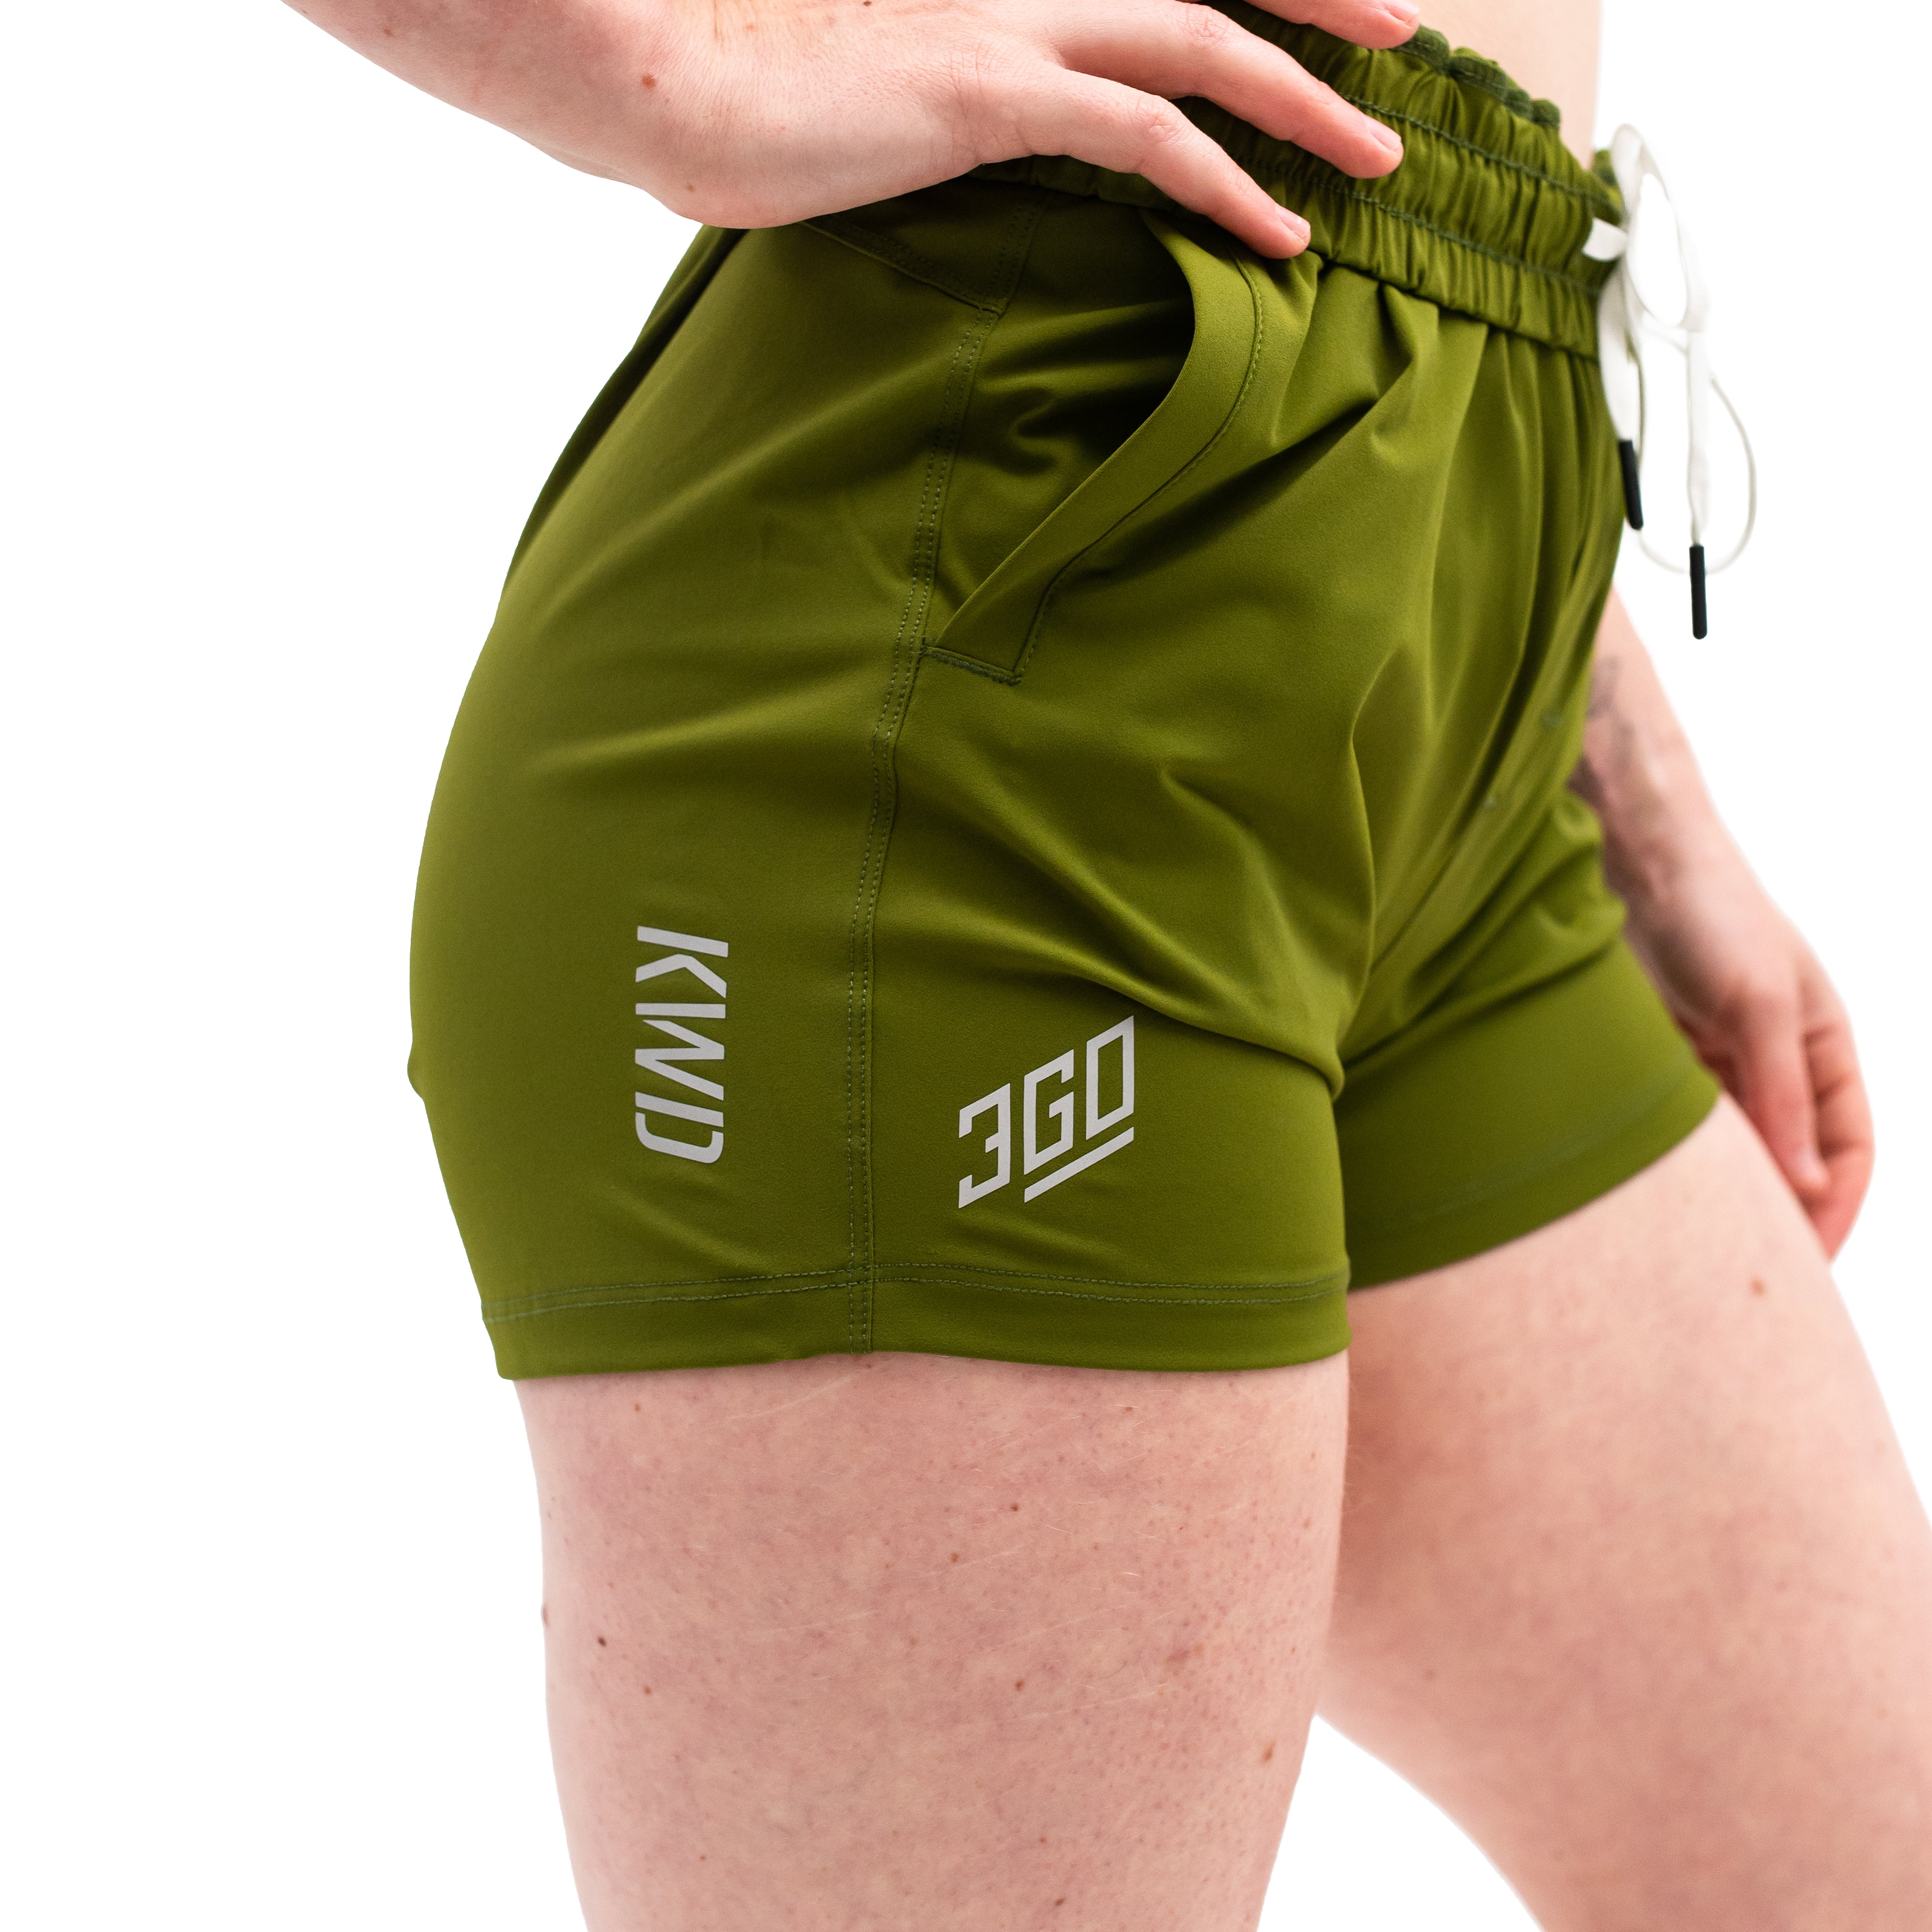 With the 360 degrees stretch of these 360GO KWD Shorts, you are sure to find a pair that will become your own whether in the gym, going on a hike, out on the town, or even just hanging around the house. We decided on a green that reflects a green that reminds us of the depth of the woods, the green moss on the trees, a calm comfort that still packs a punch when worn by our military.